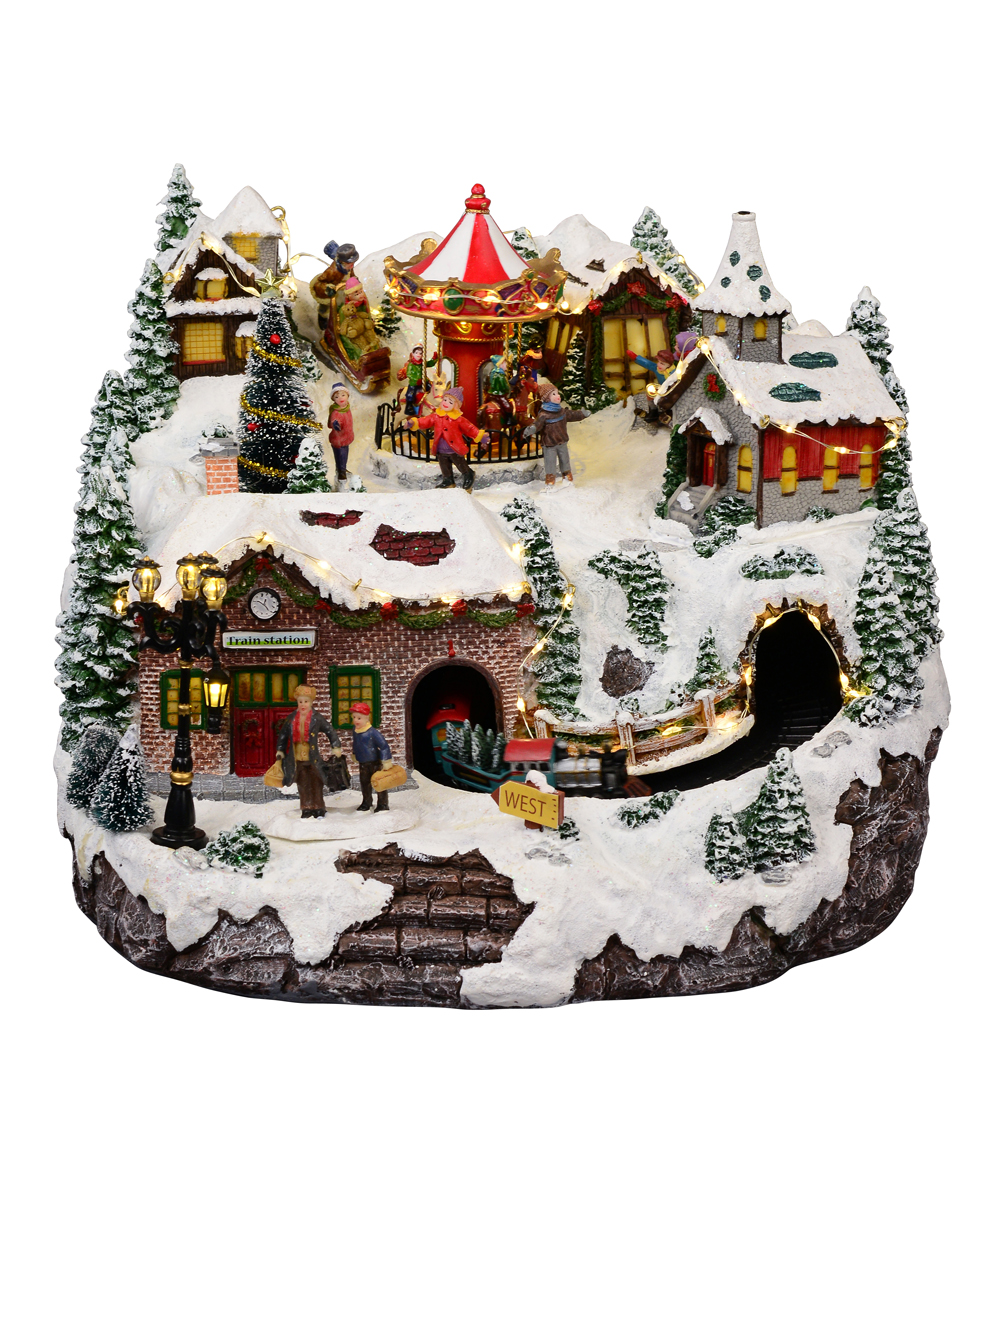 Northern Winter Christmas Village Scene With Rotating Train & Carousel -  26cm | Ornaments | Buy online from The Christmas Warehouse